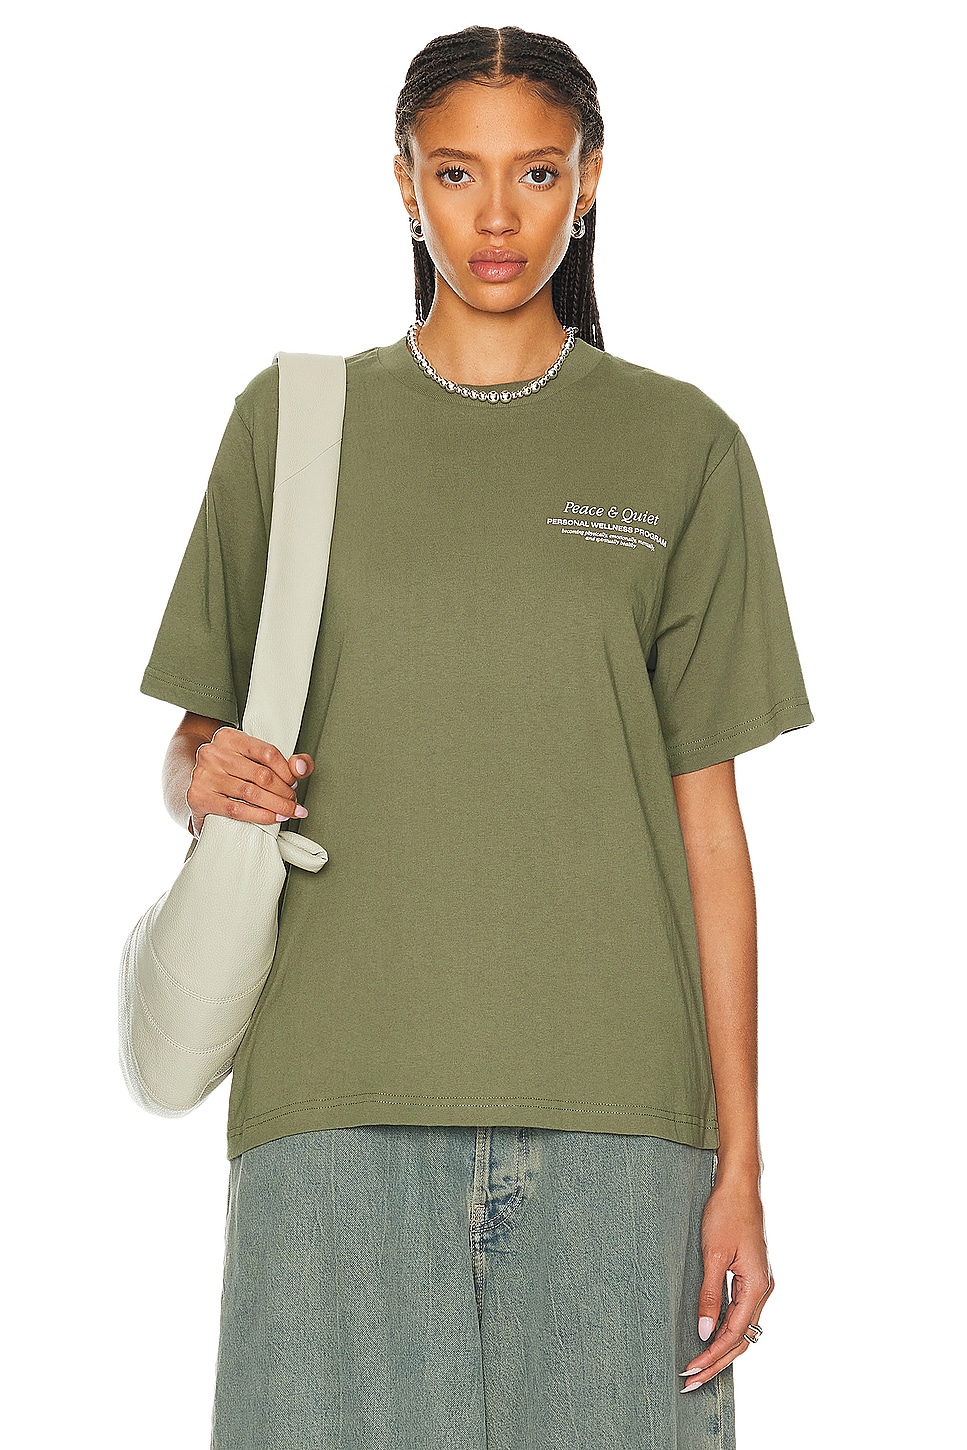 Image 1 of Museum of Peace and Quiet Wellness Program T-shirt in Olive